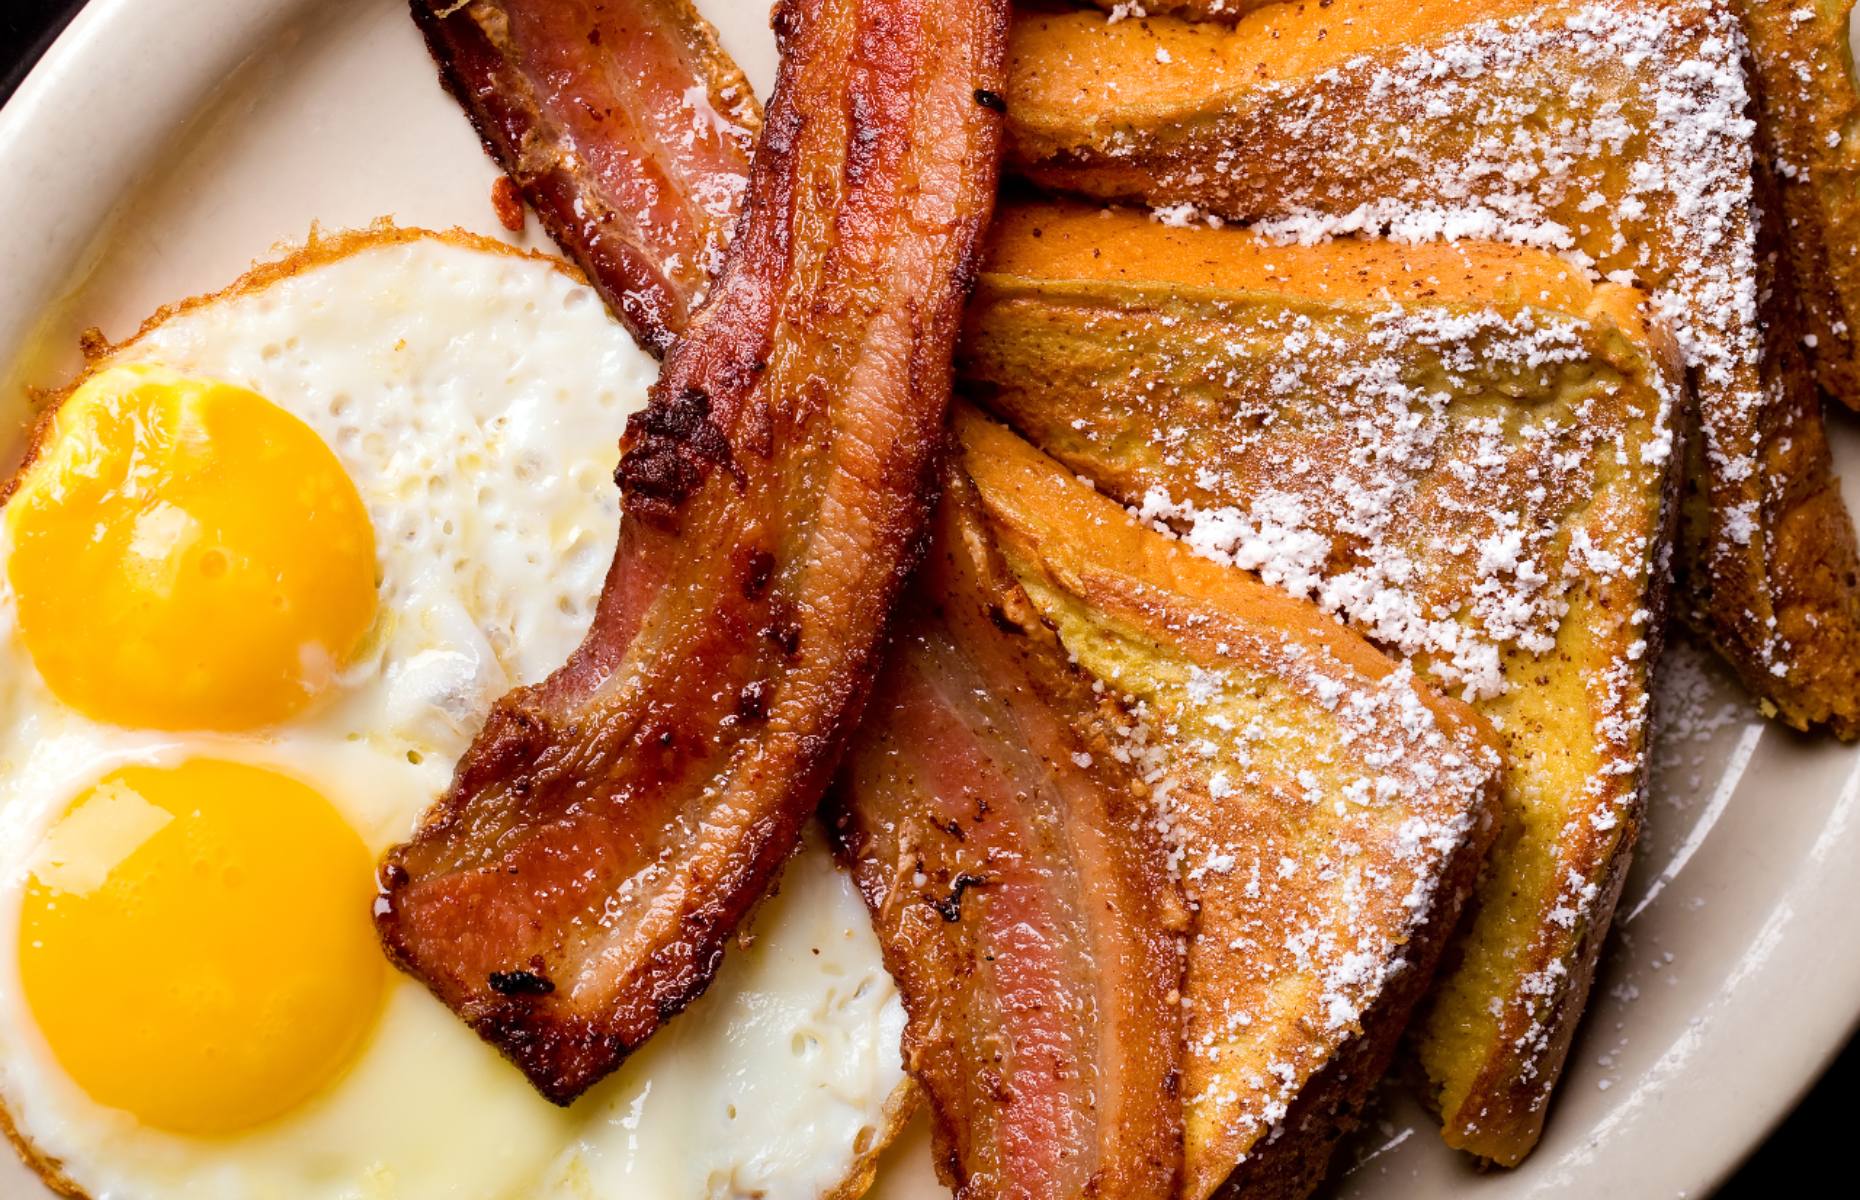 NYC diner breakfast (Image: MPH Photos/Shutterstock)